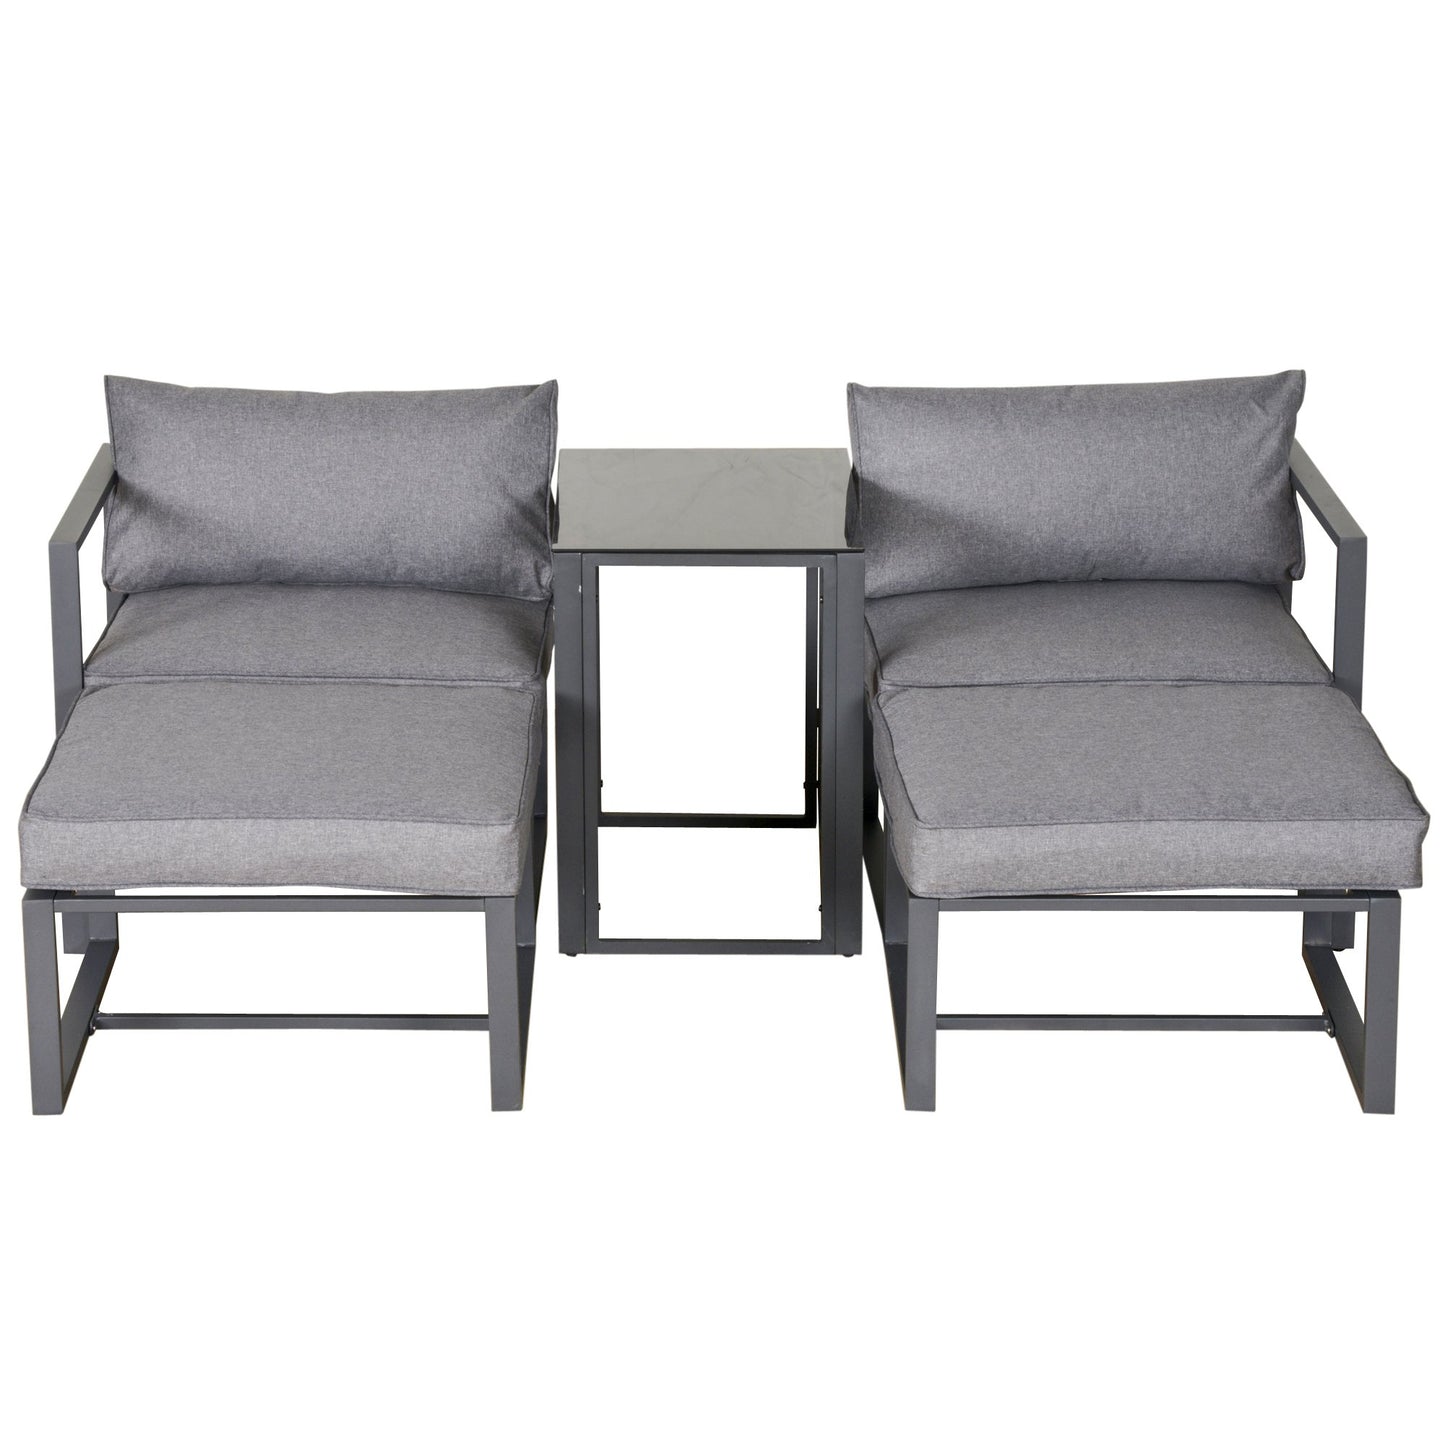 Outsunny 5 Piece Garden Conversation Set Sun Lounger 2 Footstools End Table with Cushions